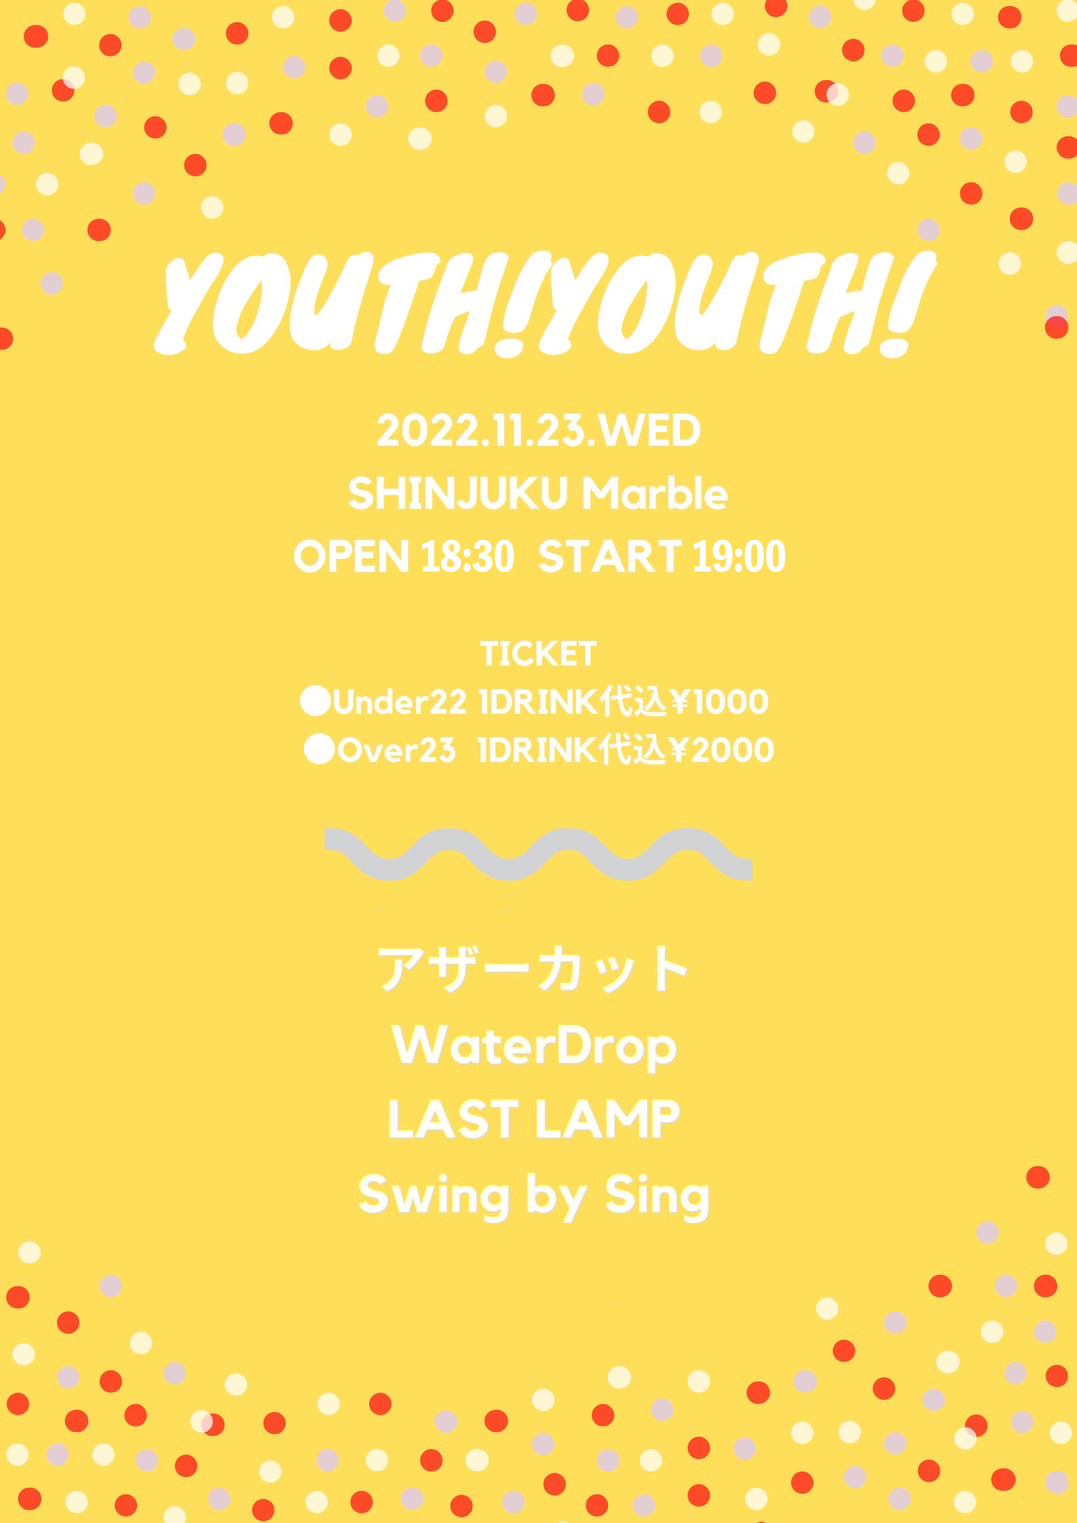 YOUTH!YOUTH!